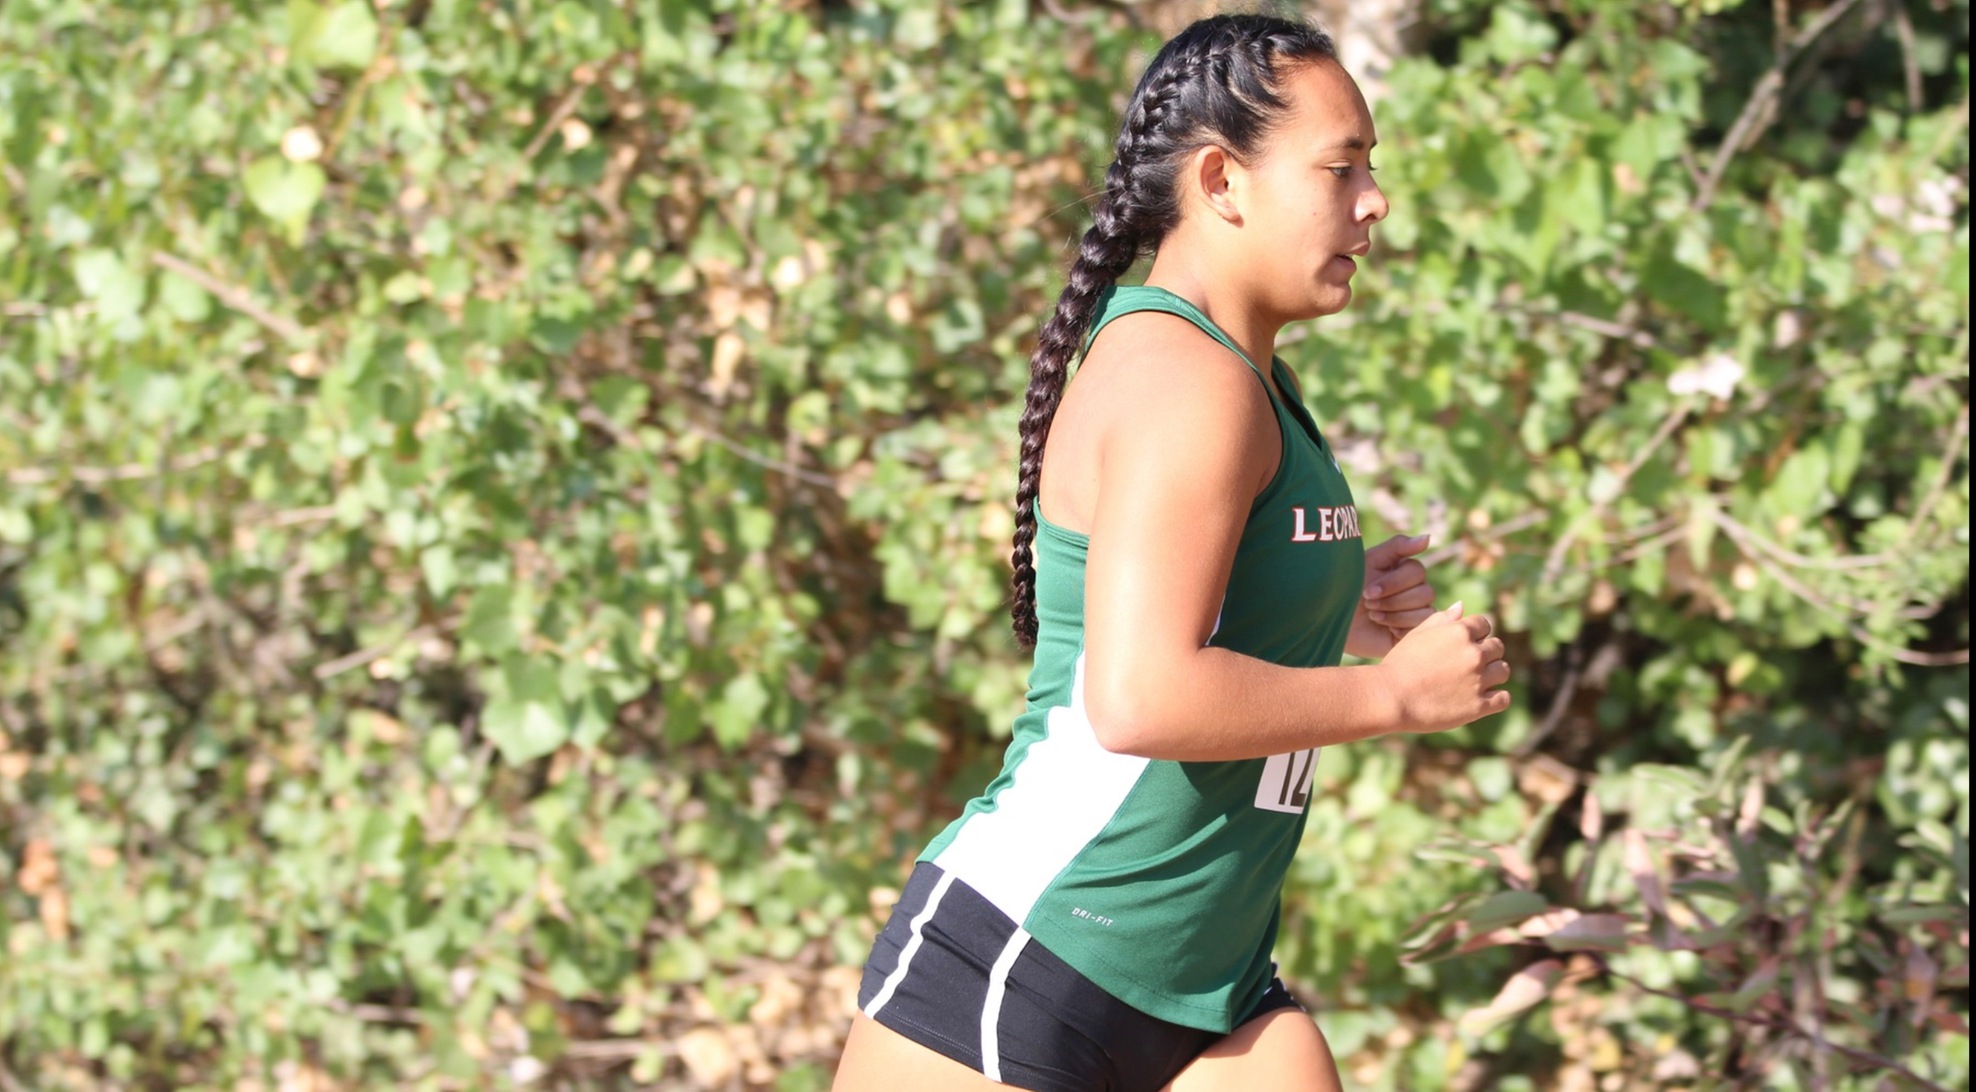 Leopards compete at Coyote Challenge